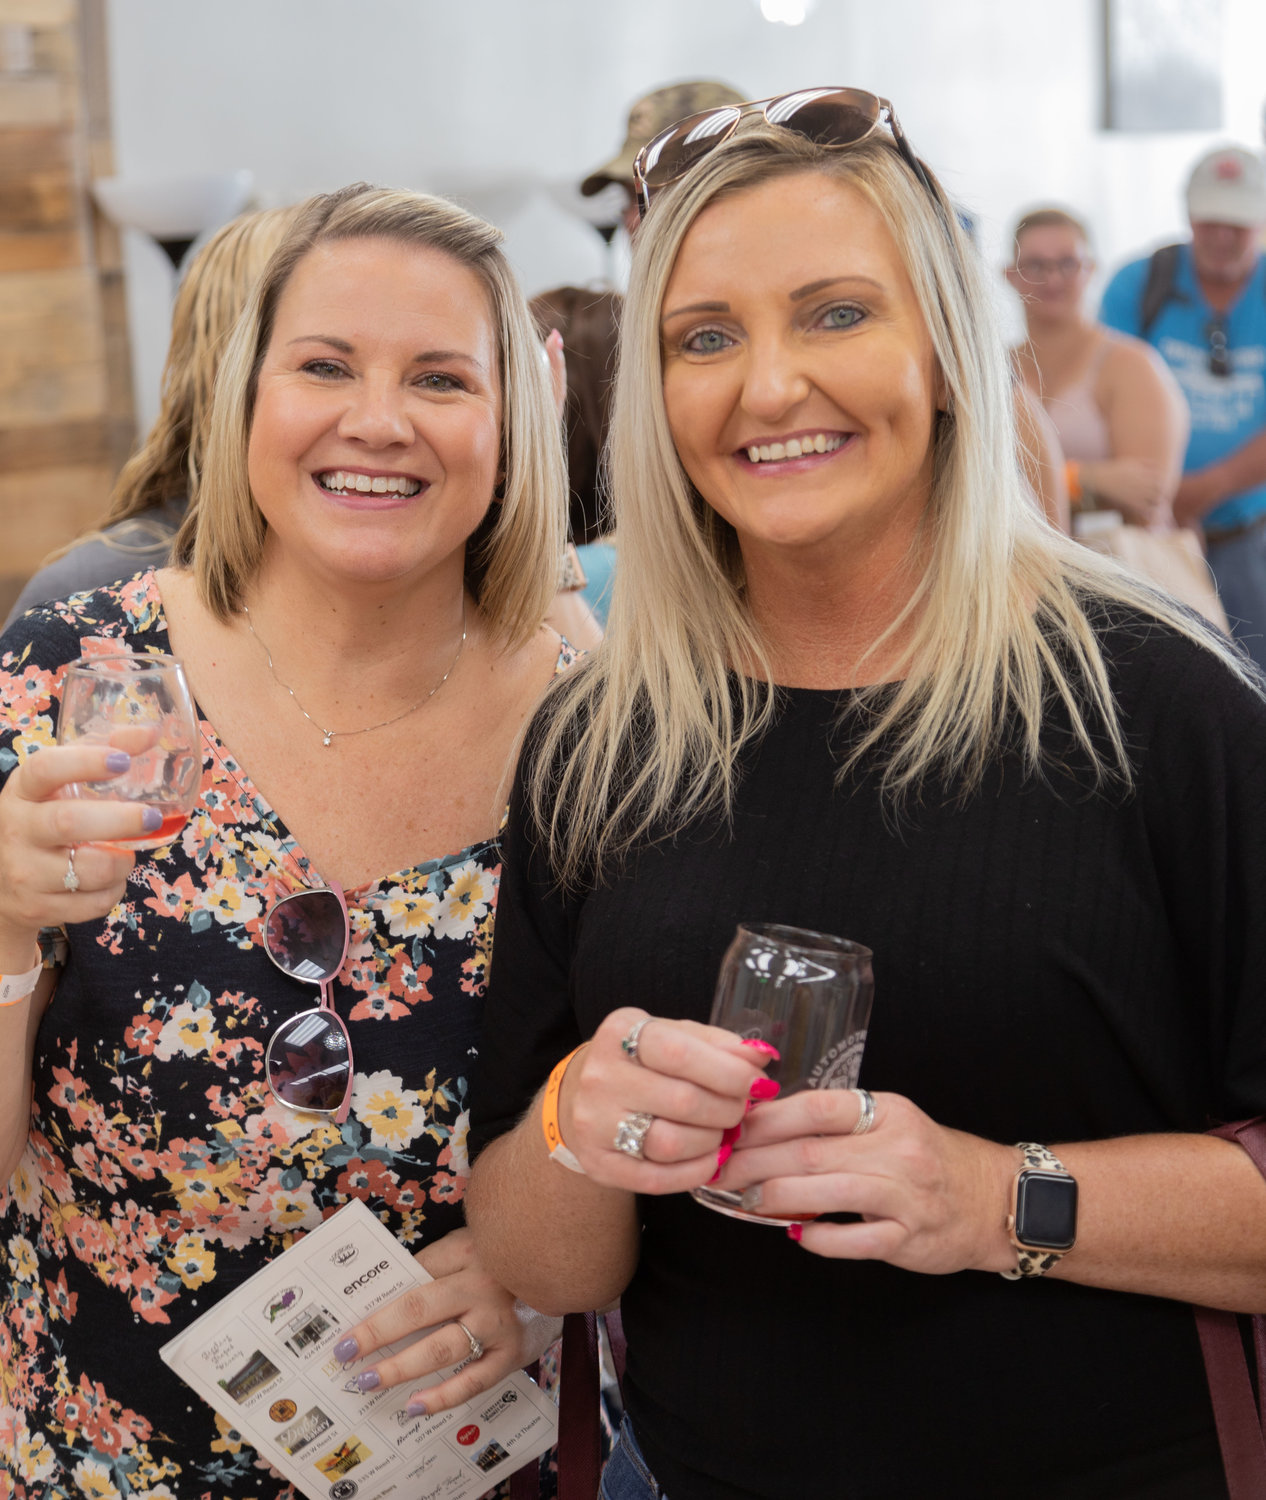 Angie Maylee and Sabra Zaner visit Salon 322 for a taste of Meramec Vineyards Winery’s product during Saturday’s Wine Stroll in downtown Moberly.